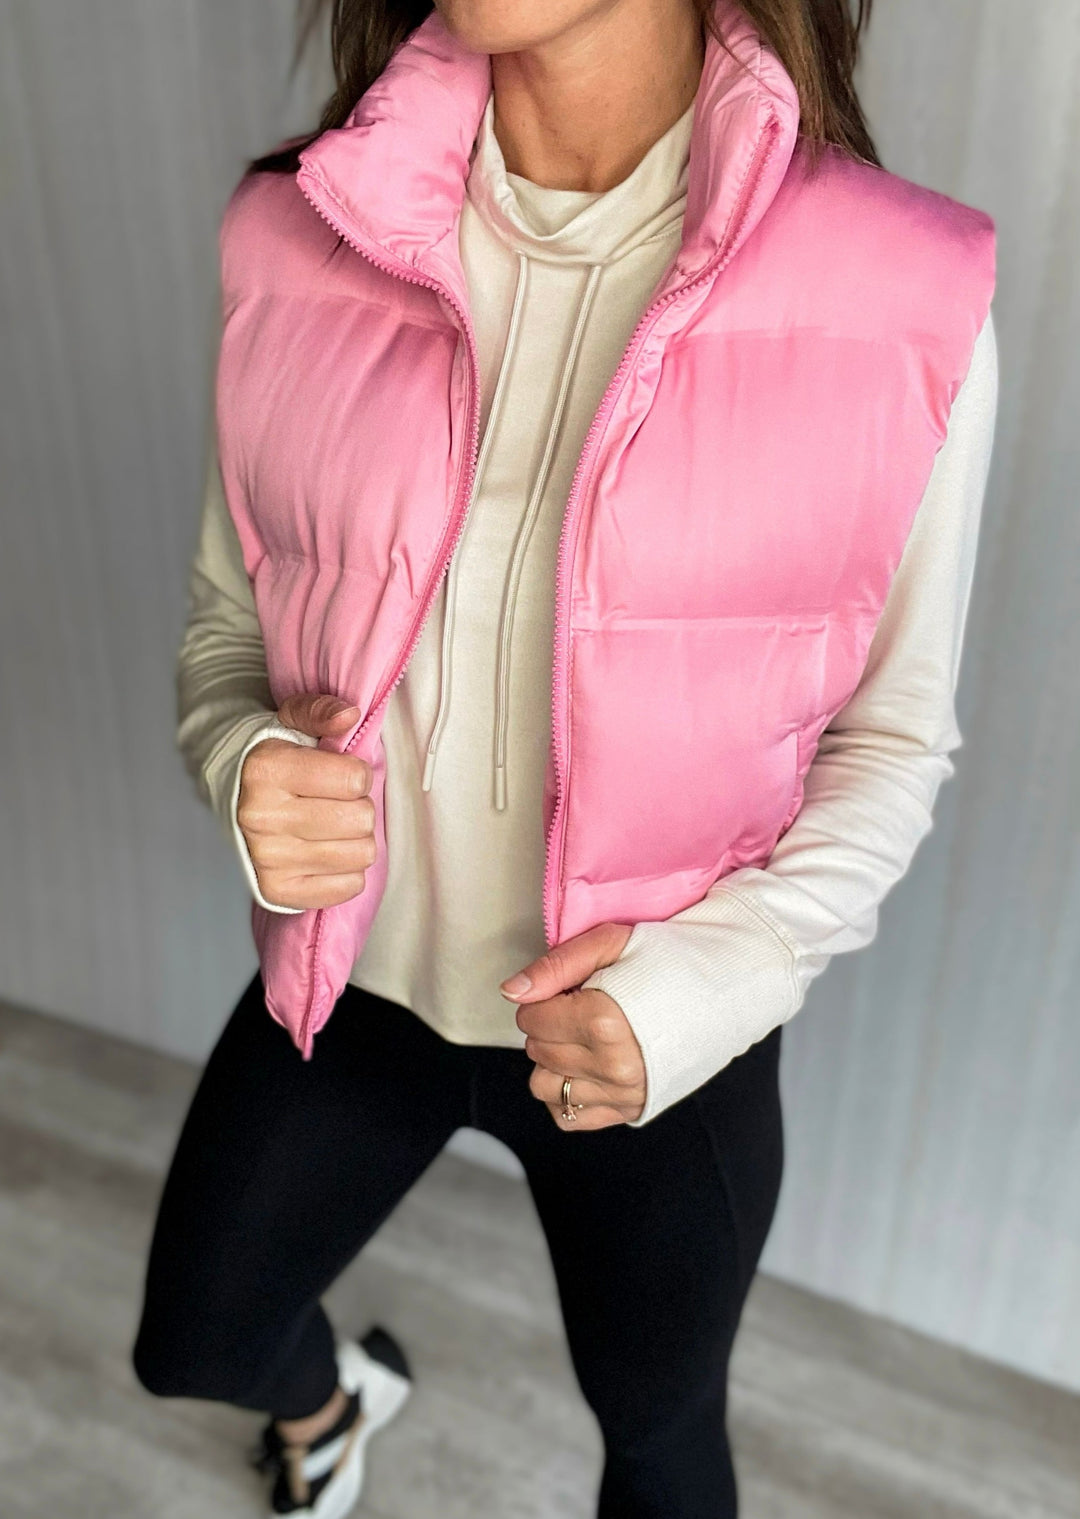 Cream Athleisure Top paired with a pink cropped puffer vest | How to wear cropped puffer vests